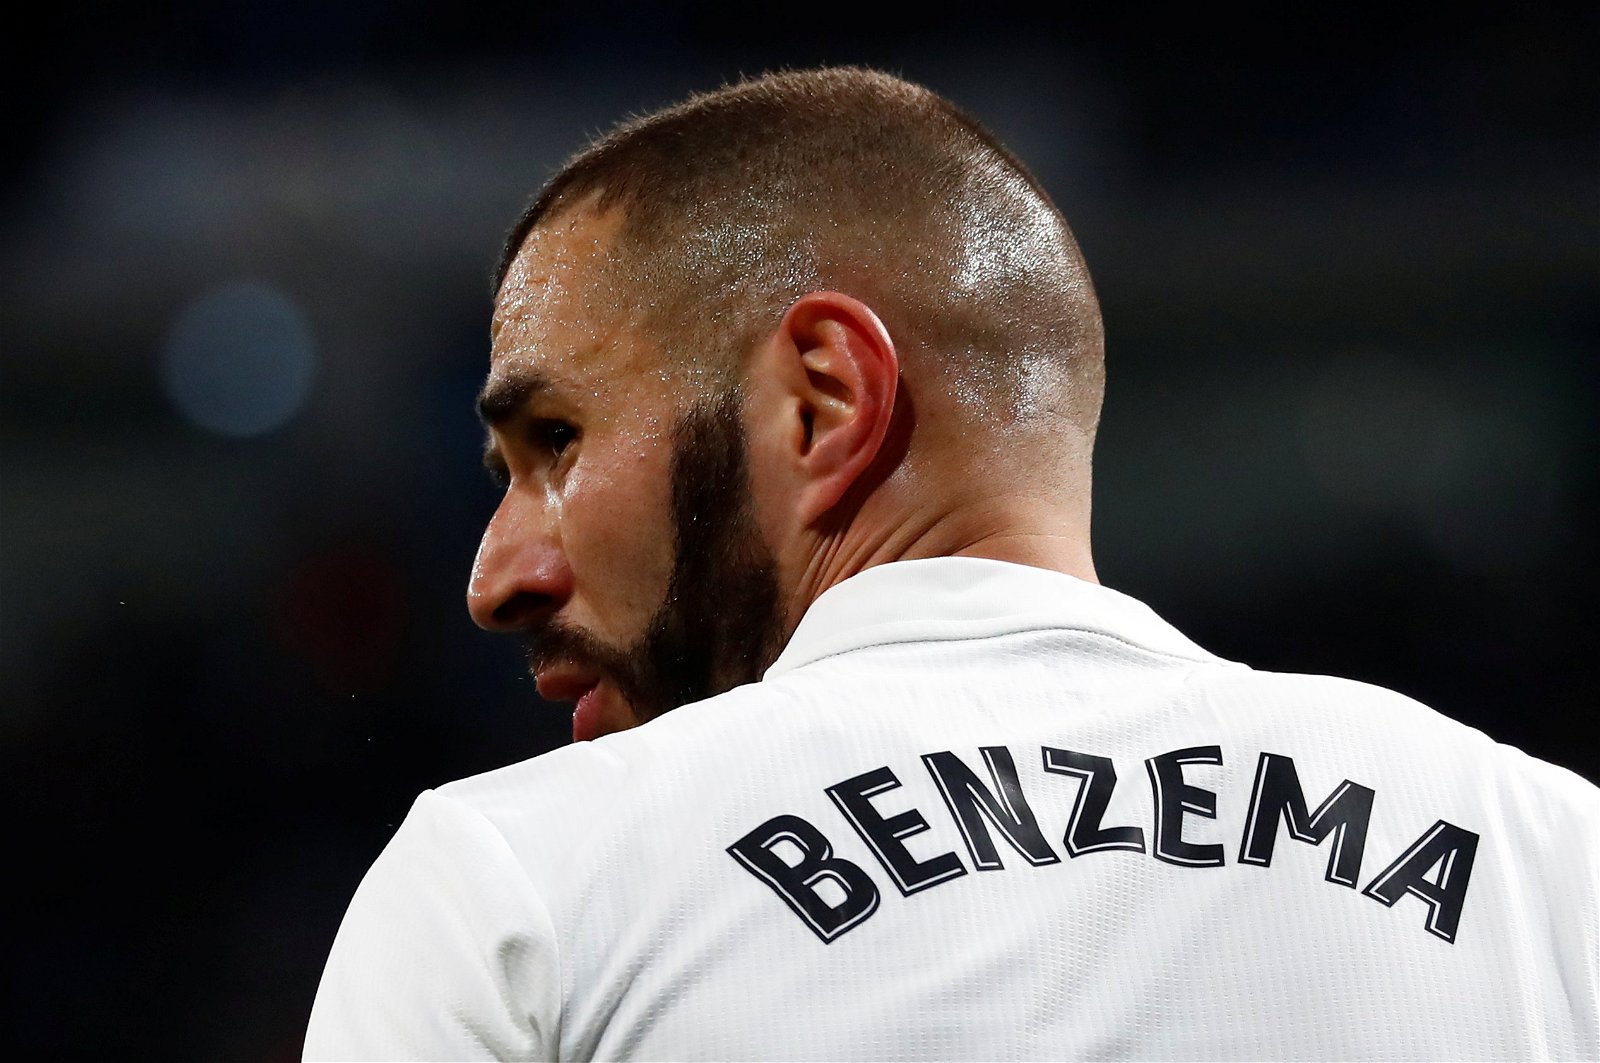 Bets On Karim Benzema To Chelsea Suspended By Leading Bookmaker